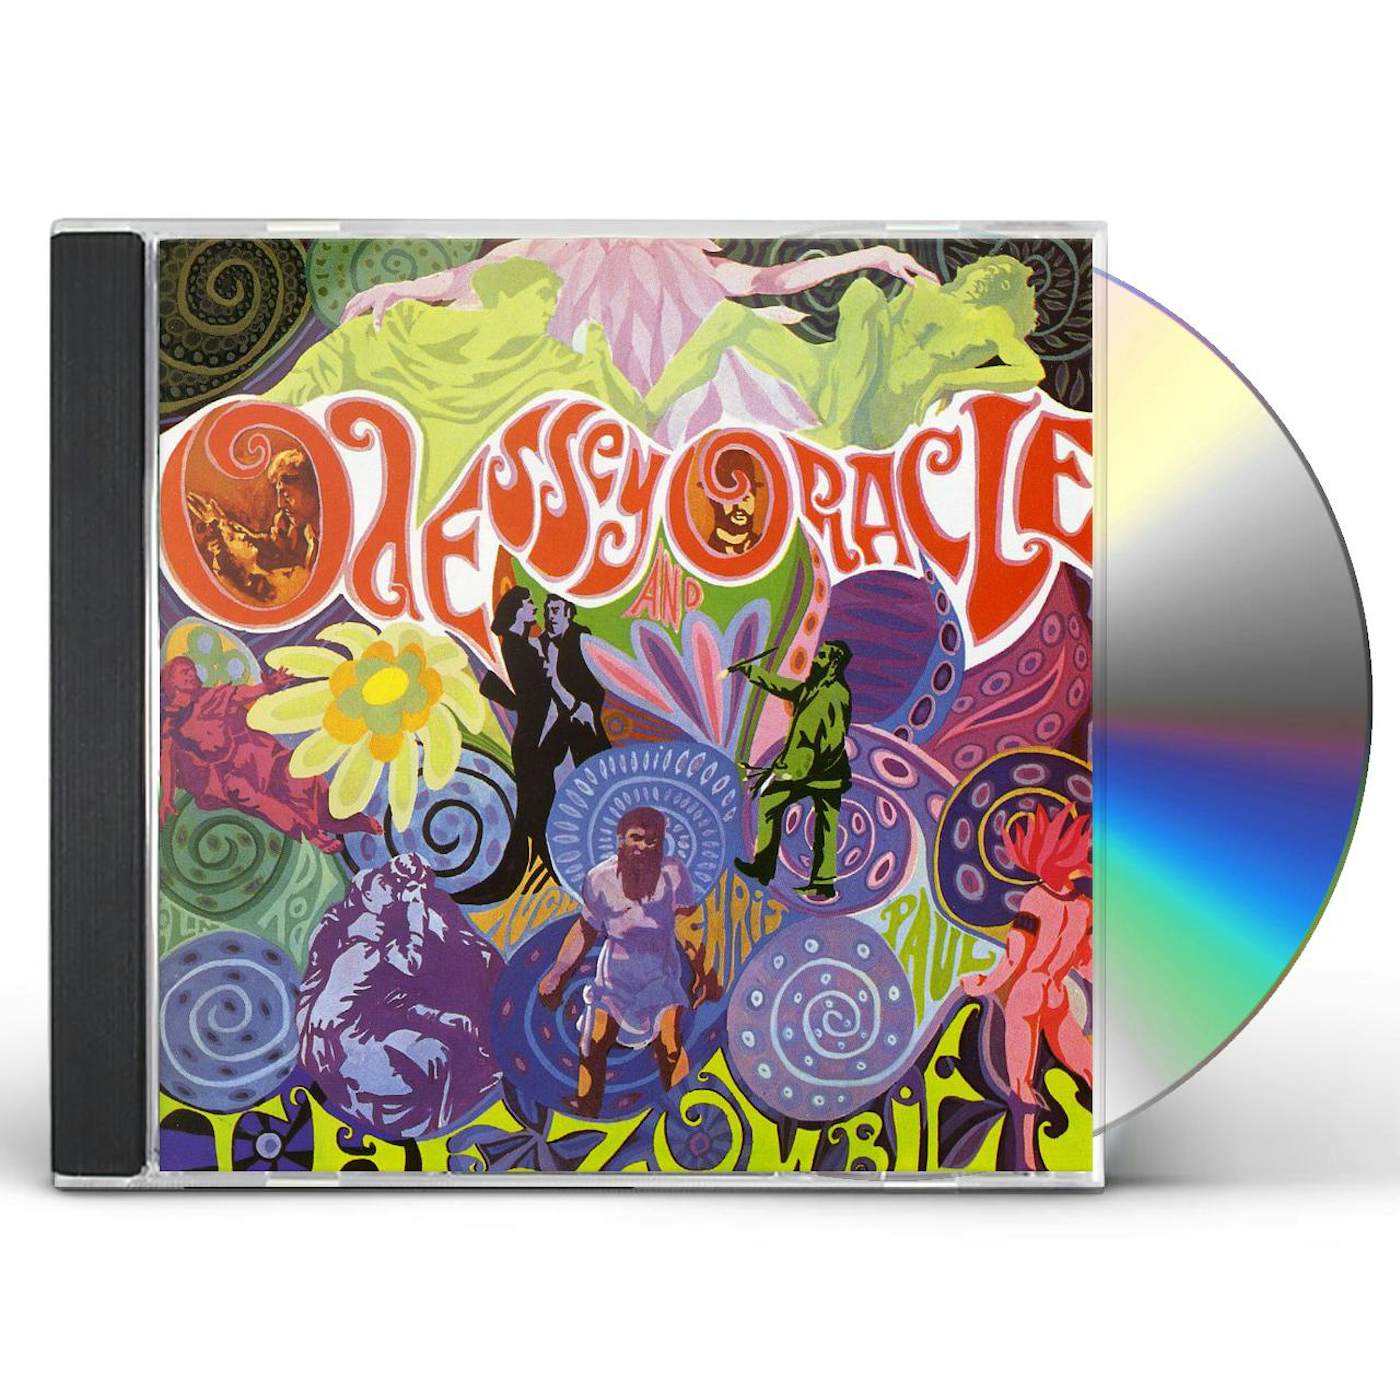 The Zombies ODYSSEY & ORACLE CD